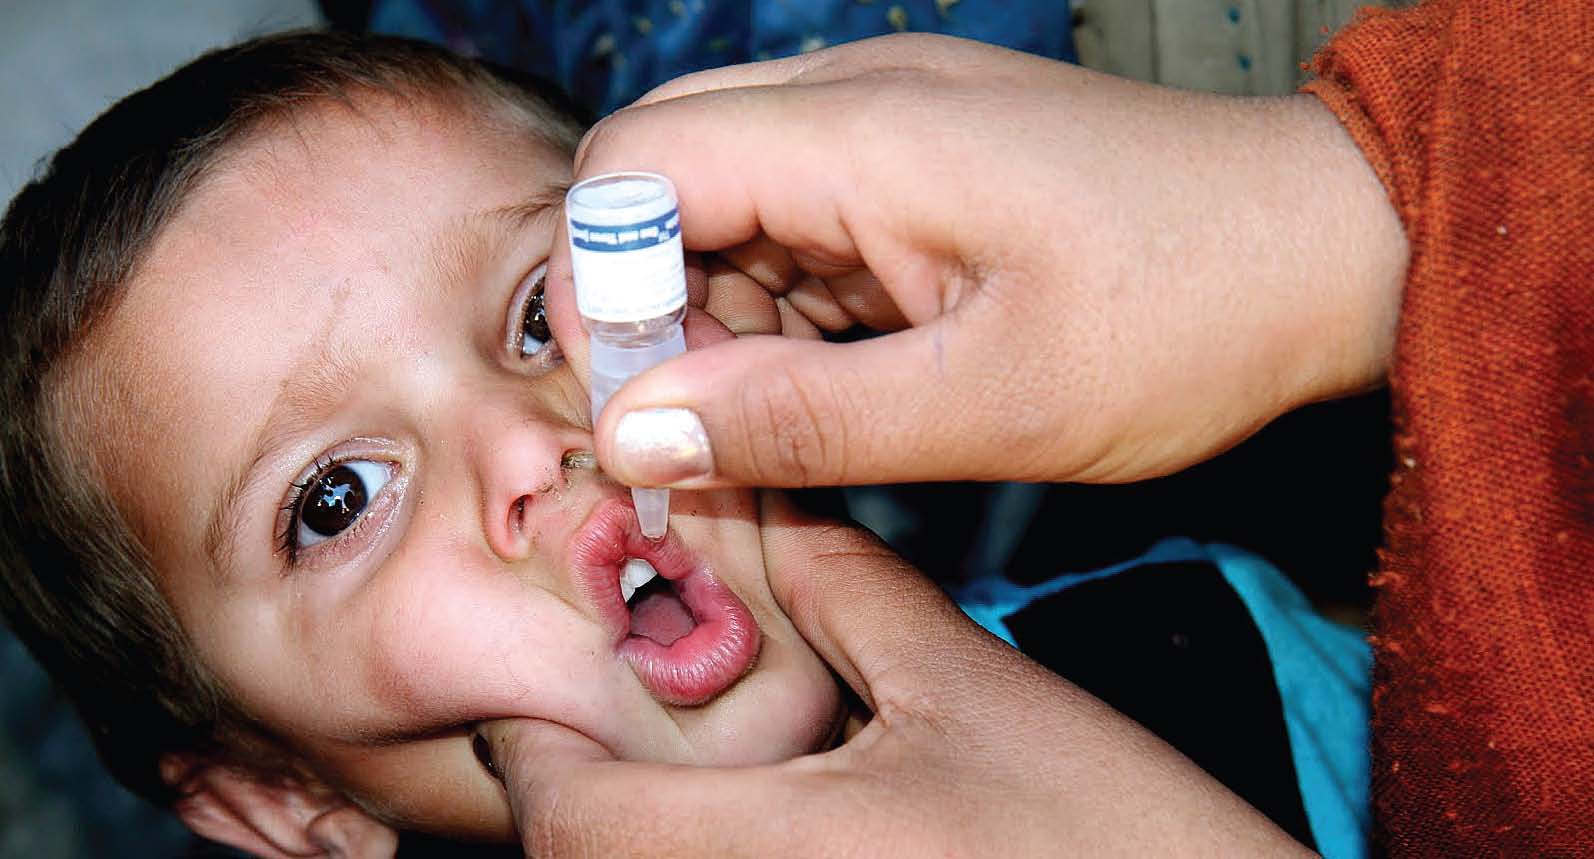 A little boy being given the polio vaccine through his mouth